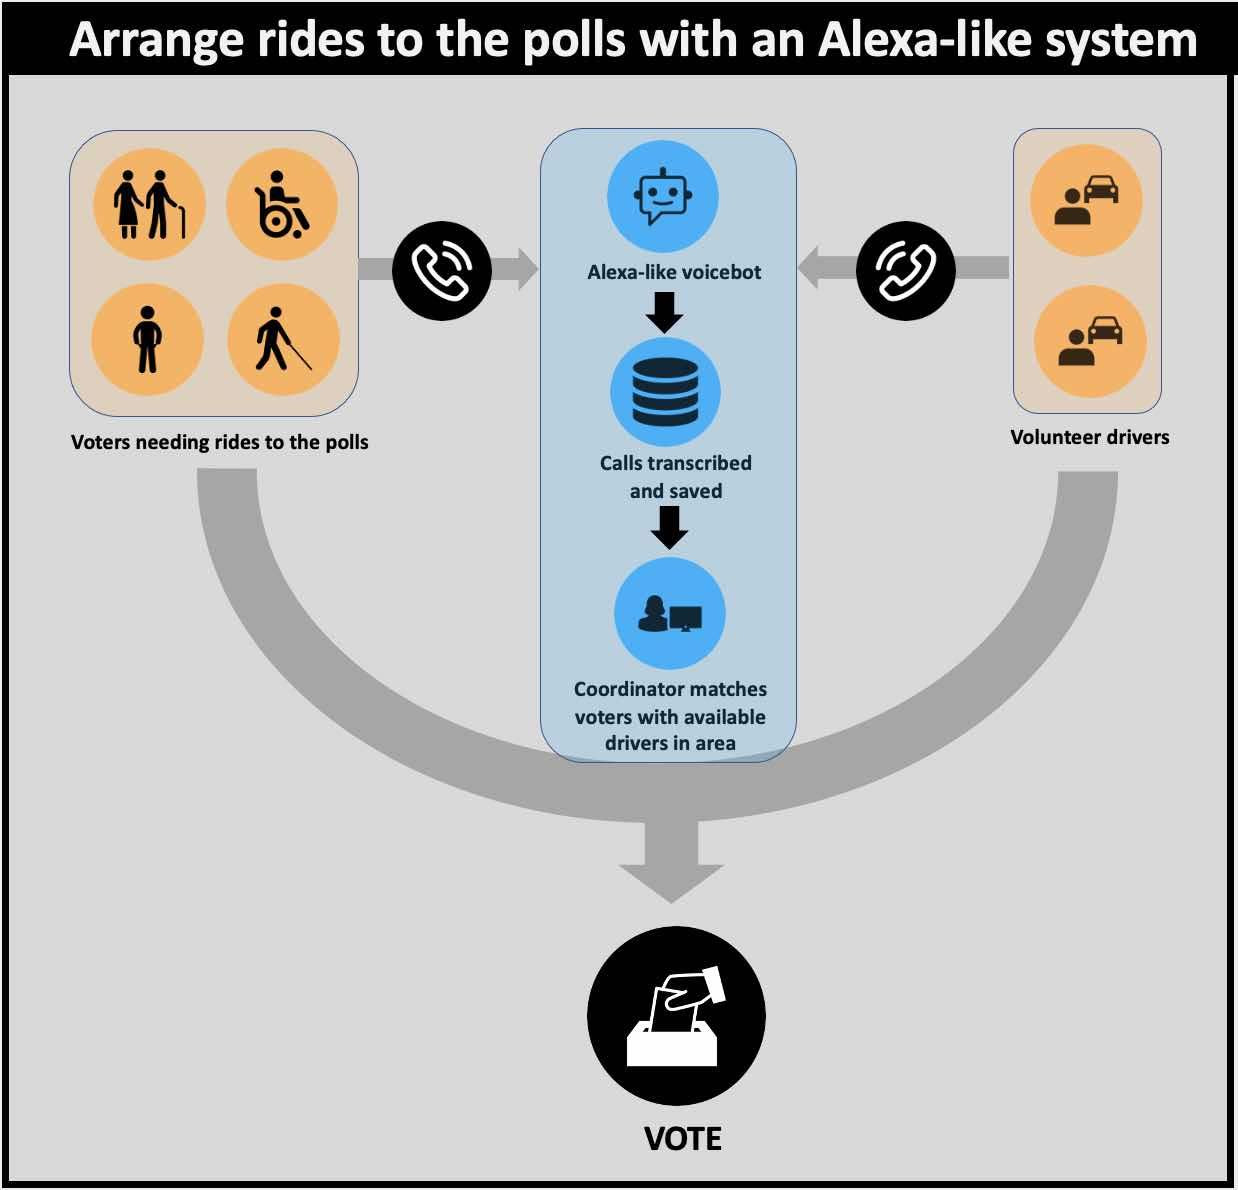 Arrange rides to the polls for seniors with ALEXA like system so they can vote to protect Social Security and Medicare.